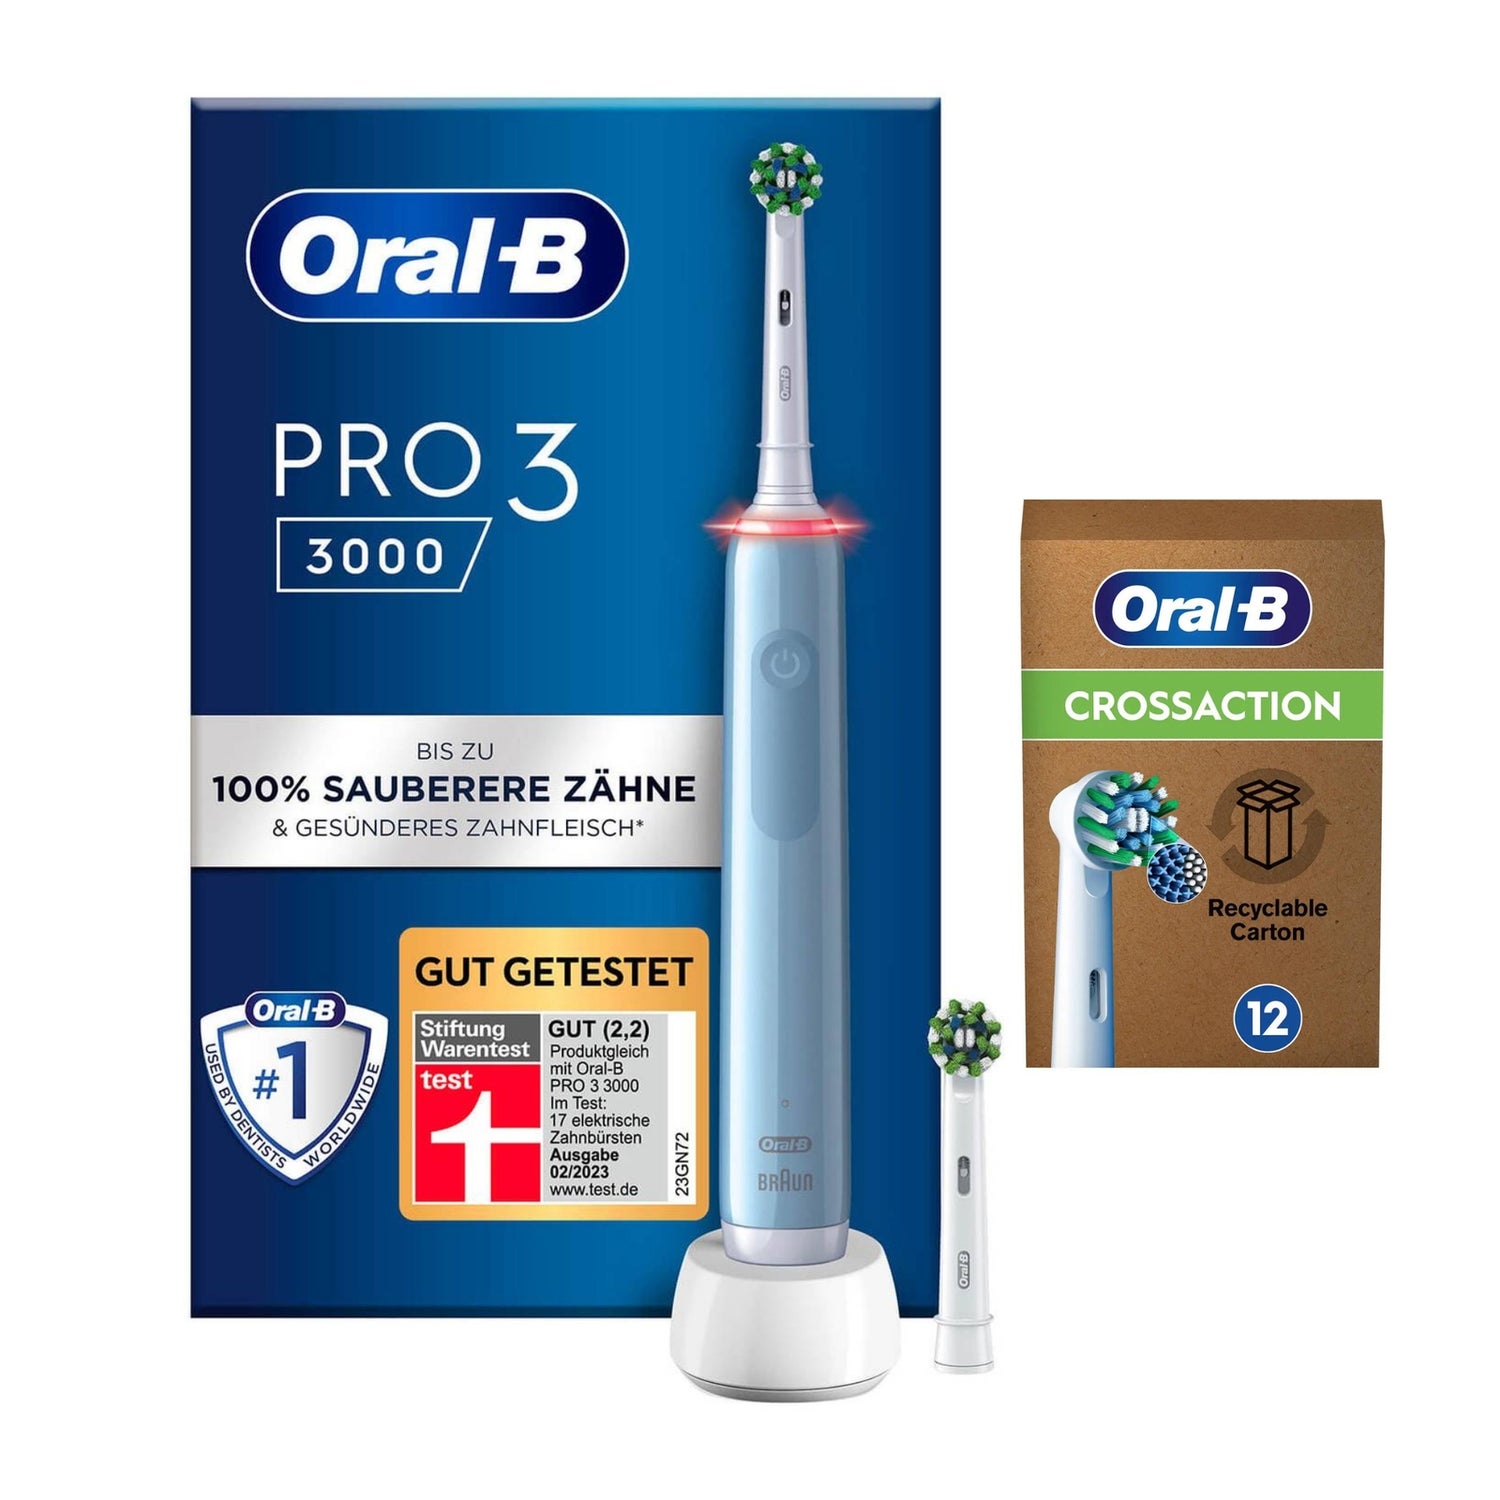 Oral B Power Pro 3 3000 Cross Action Electric Toothbrush Blue